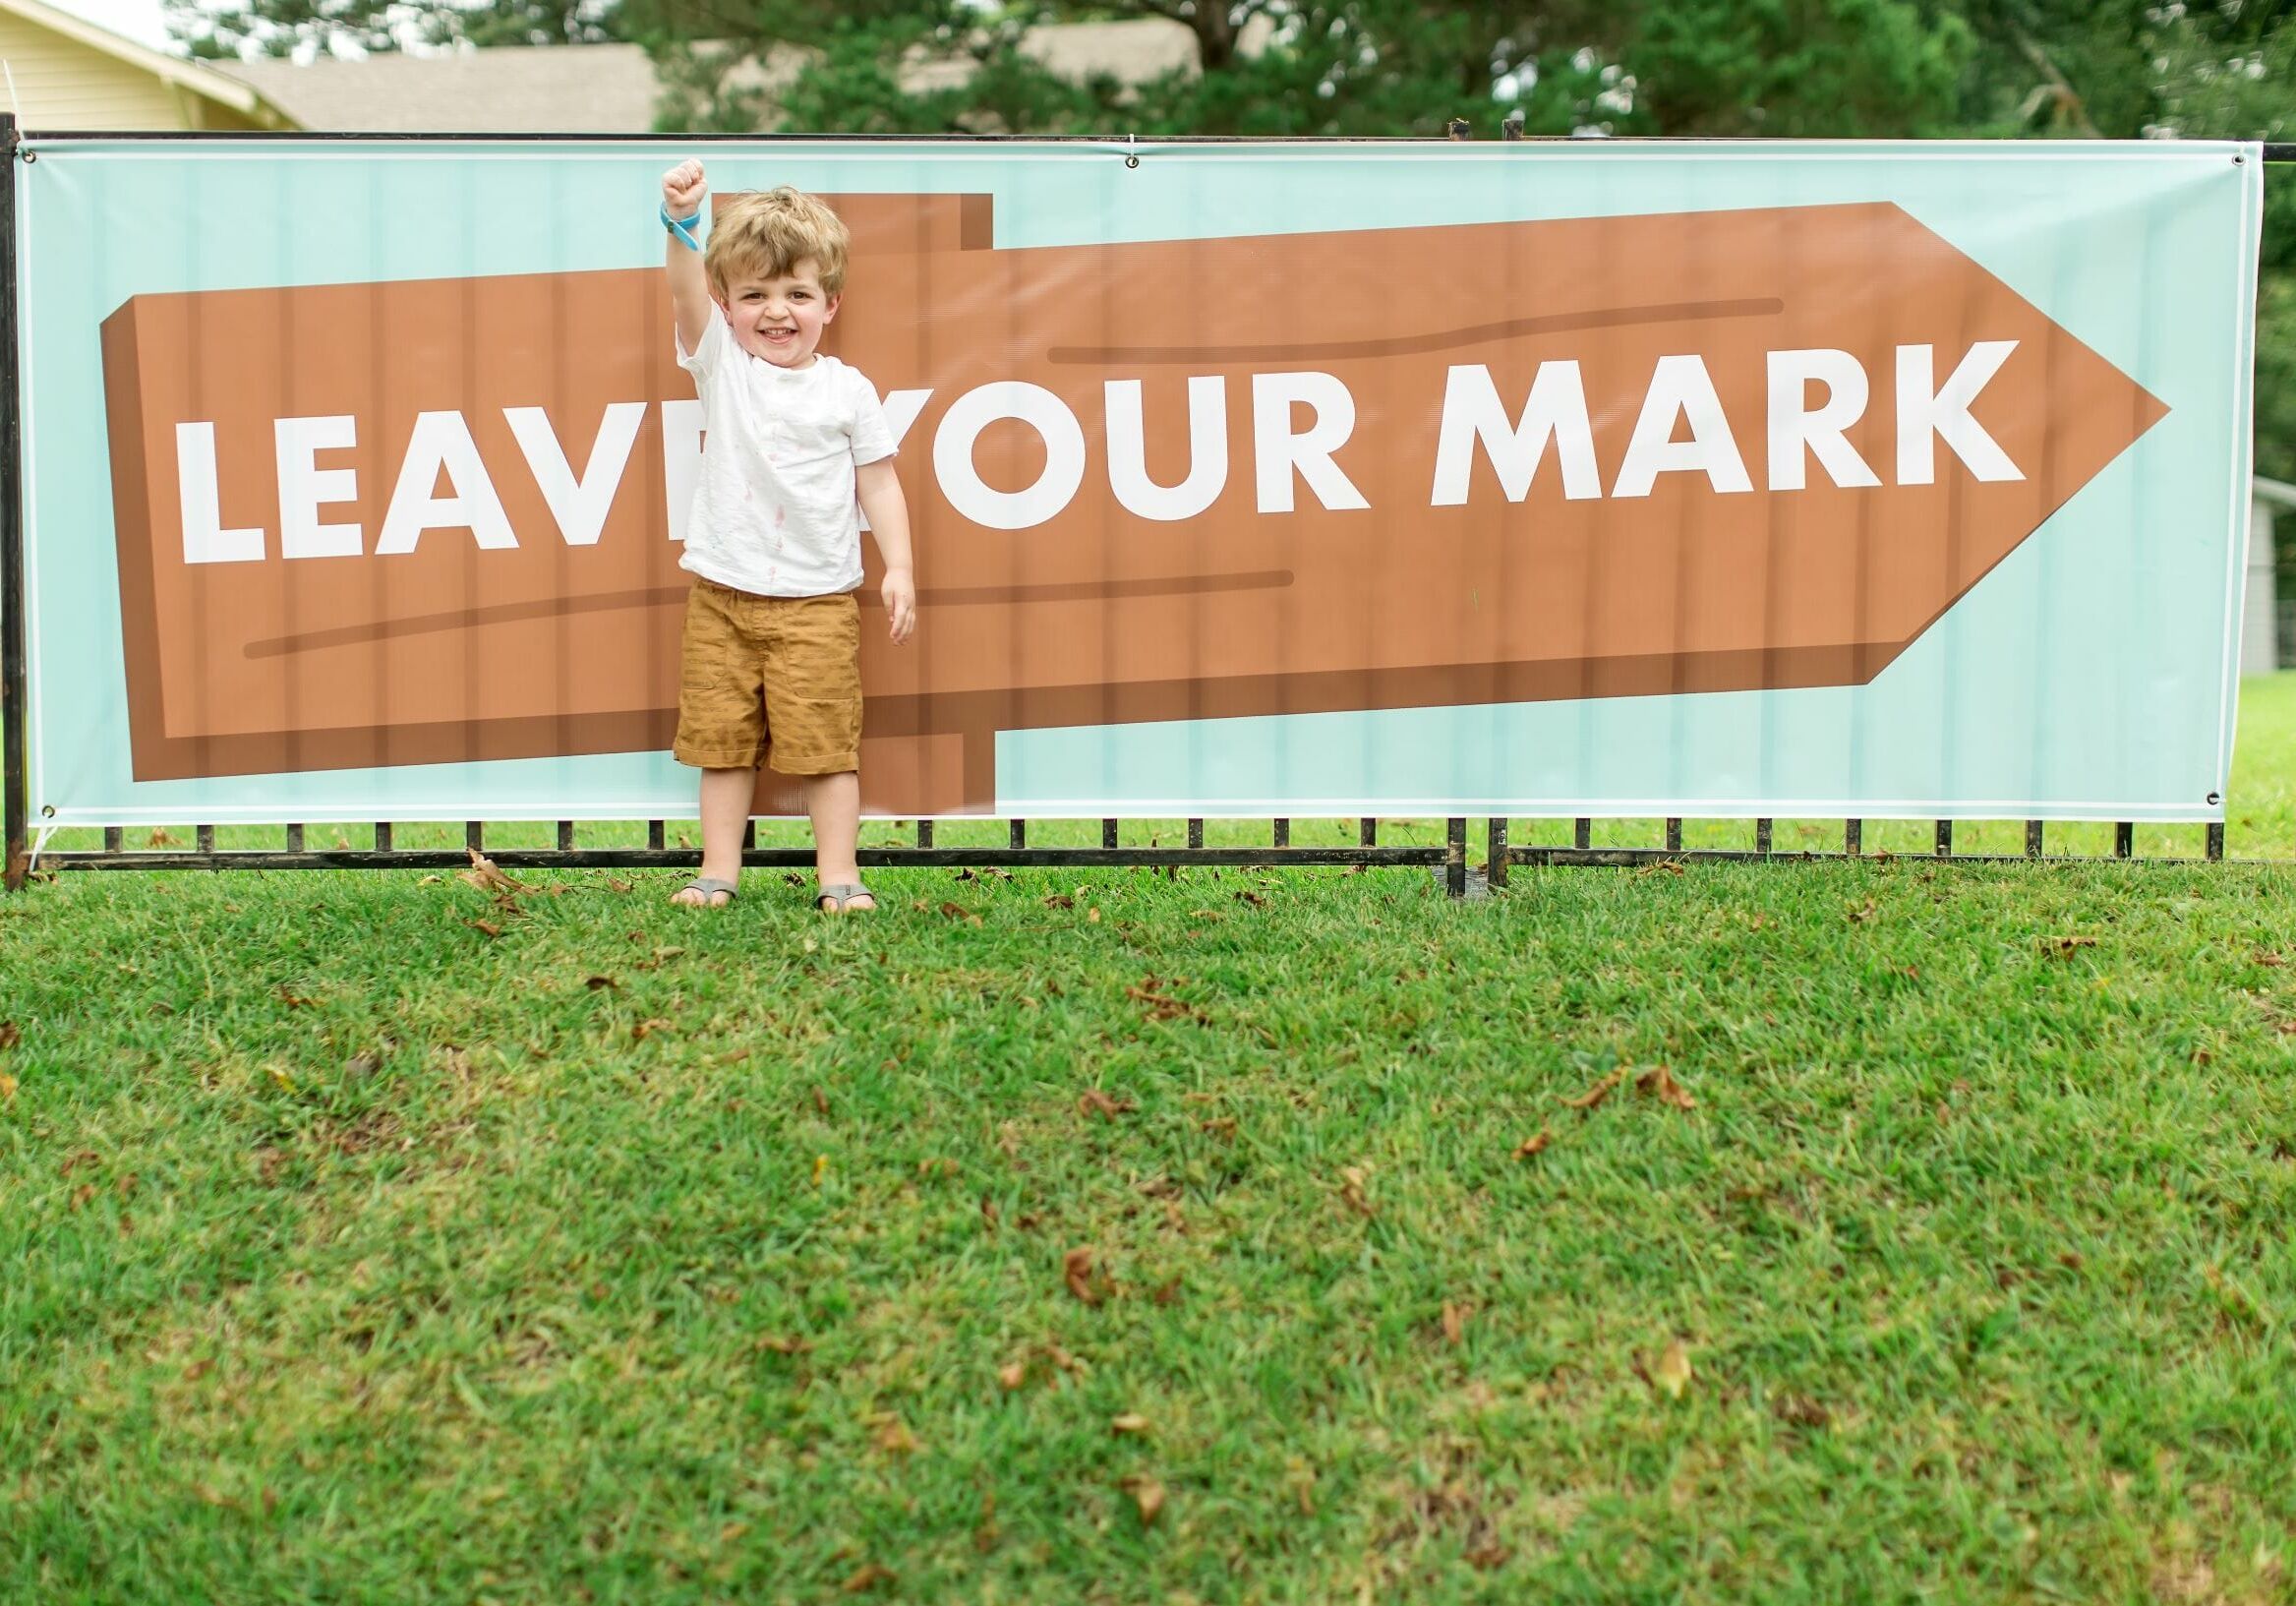 A little boy raising his fist in front of a sign that reads “Leave Your Mark”